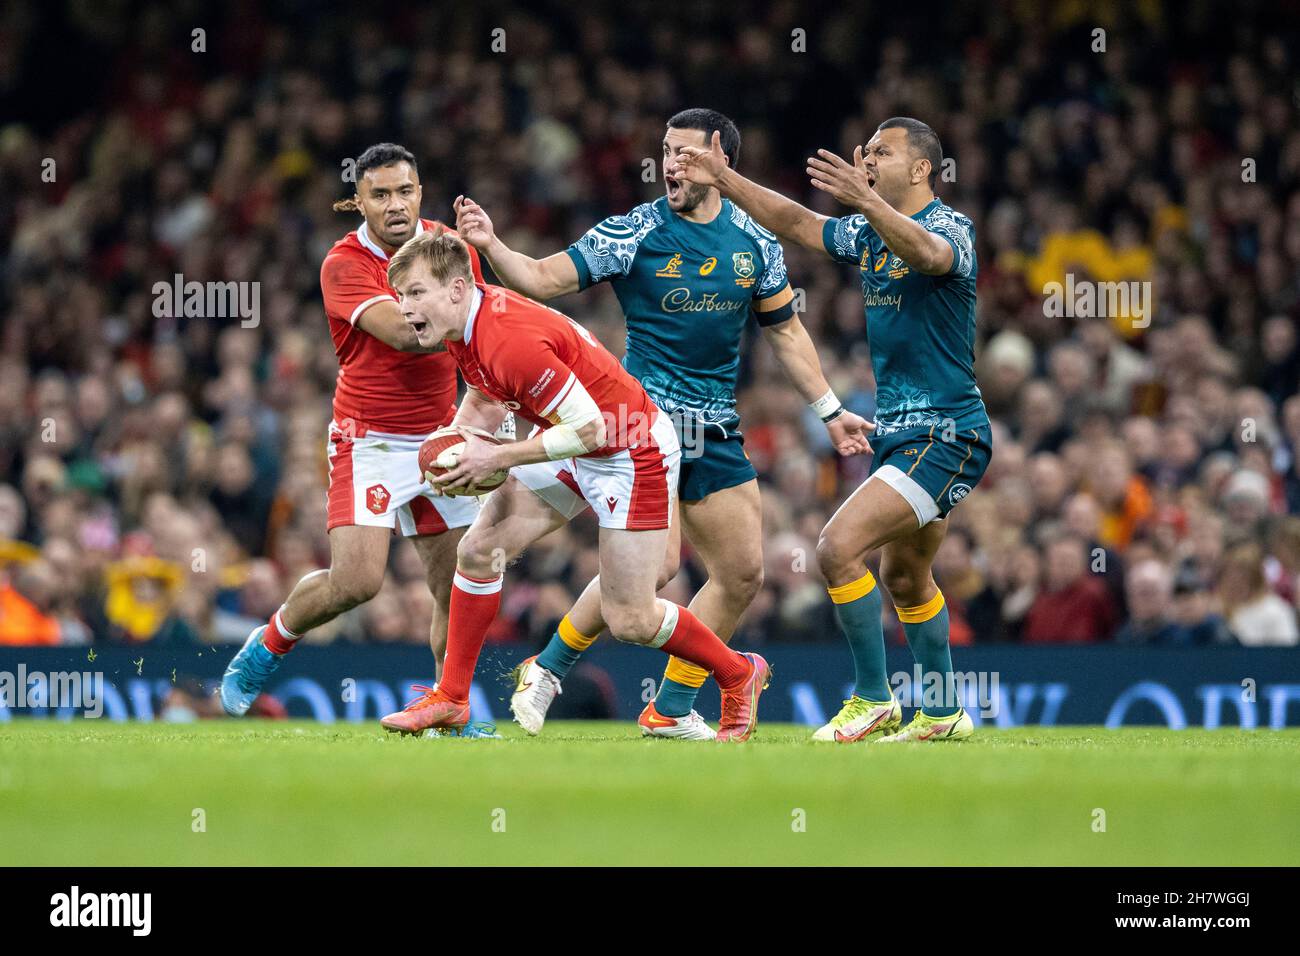 Kurtley Beale and Tom Wright appeal for a knock on by outside centre, Nick Tompkins, as he recovers the ball and scampers away to score a try under the posts for Wales. Stock Photo